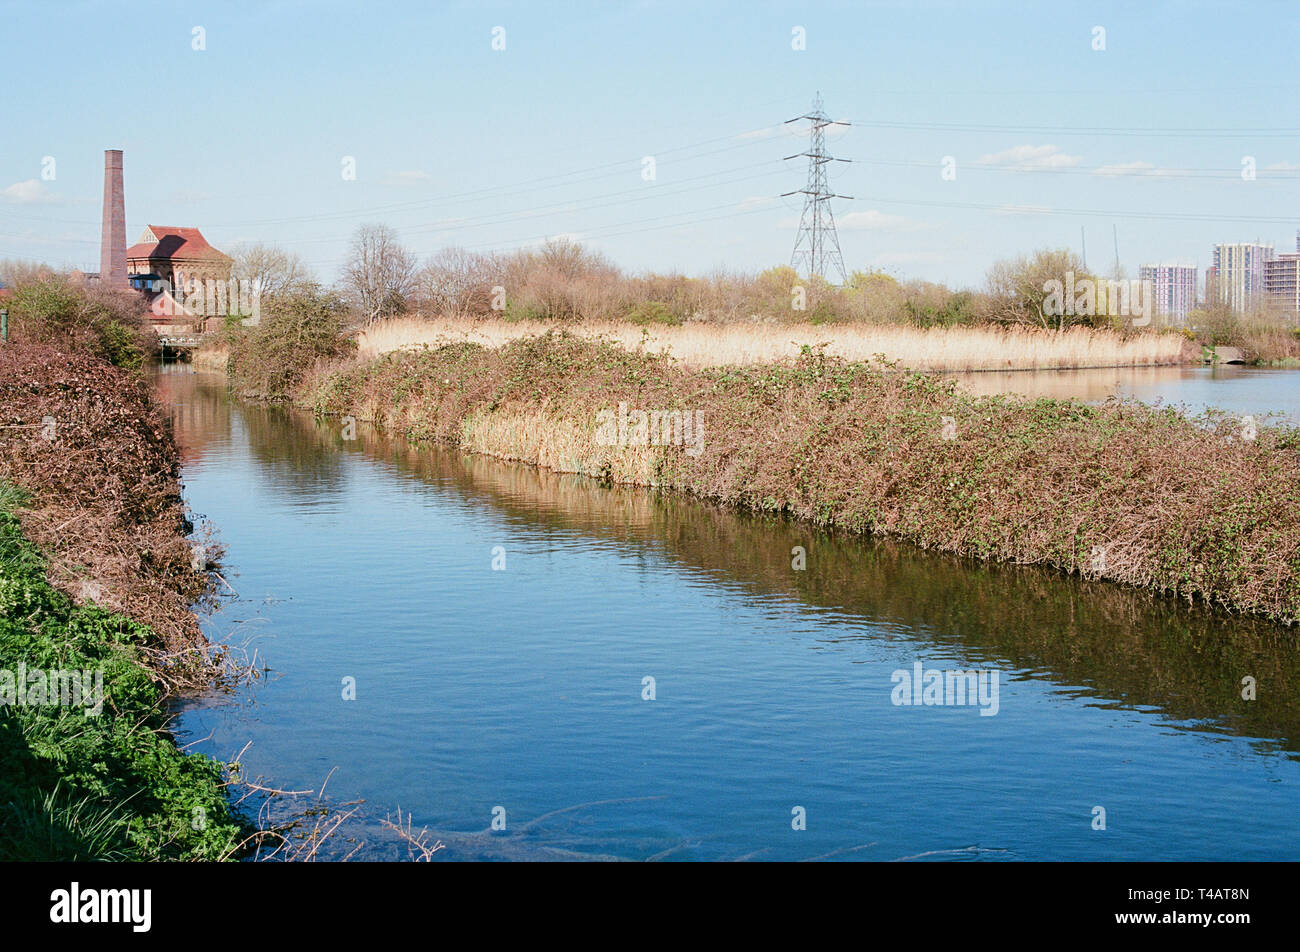 Coppermill Stream on Walthamstow Wetlands, North East London UK, with the Victorian Engine House building and chimney in background Stock Photo